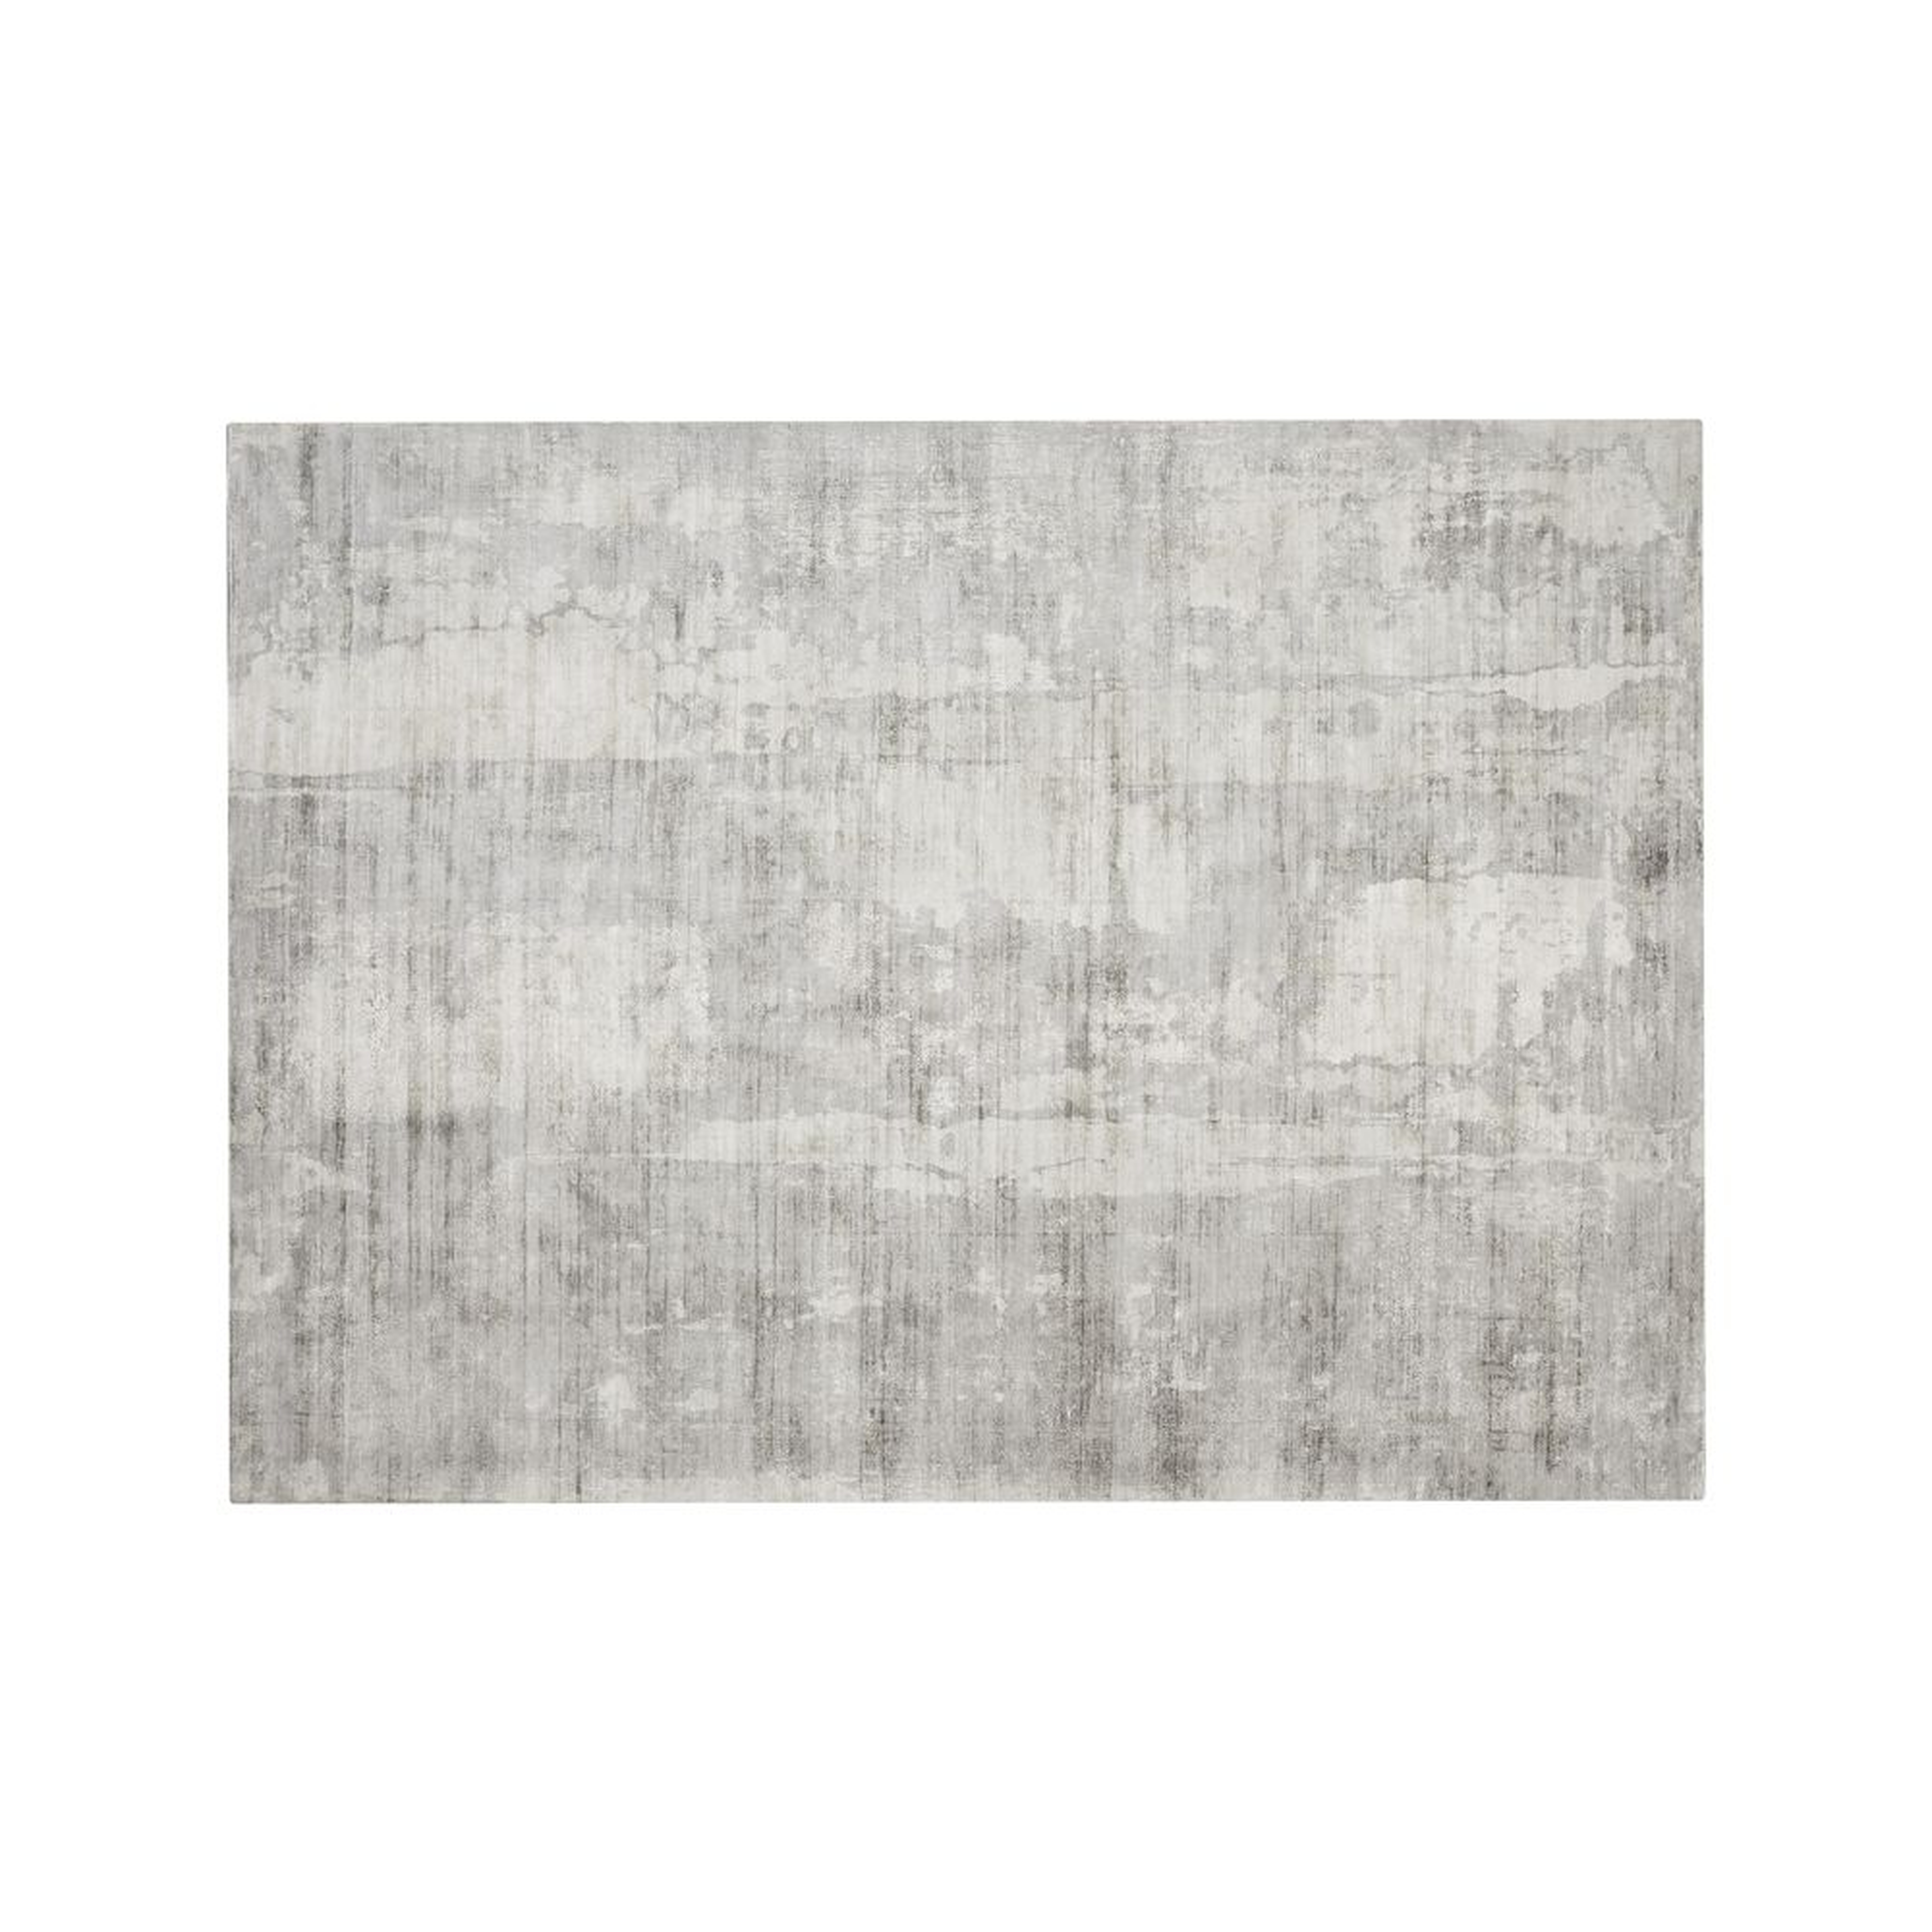 Tottori Abstract Rug 9'x12' - Crate and Barrel